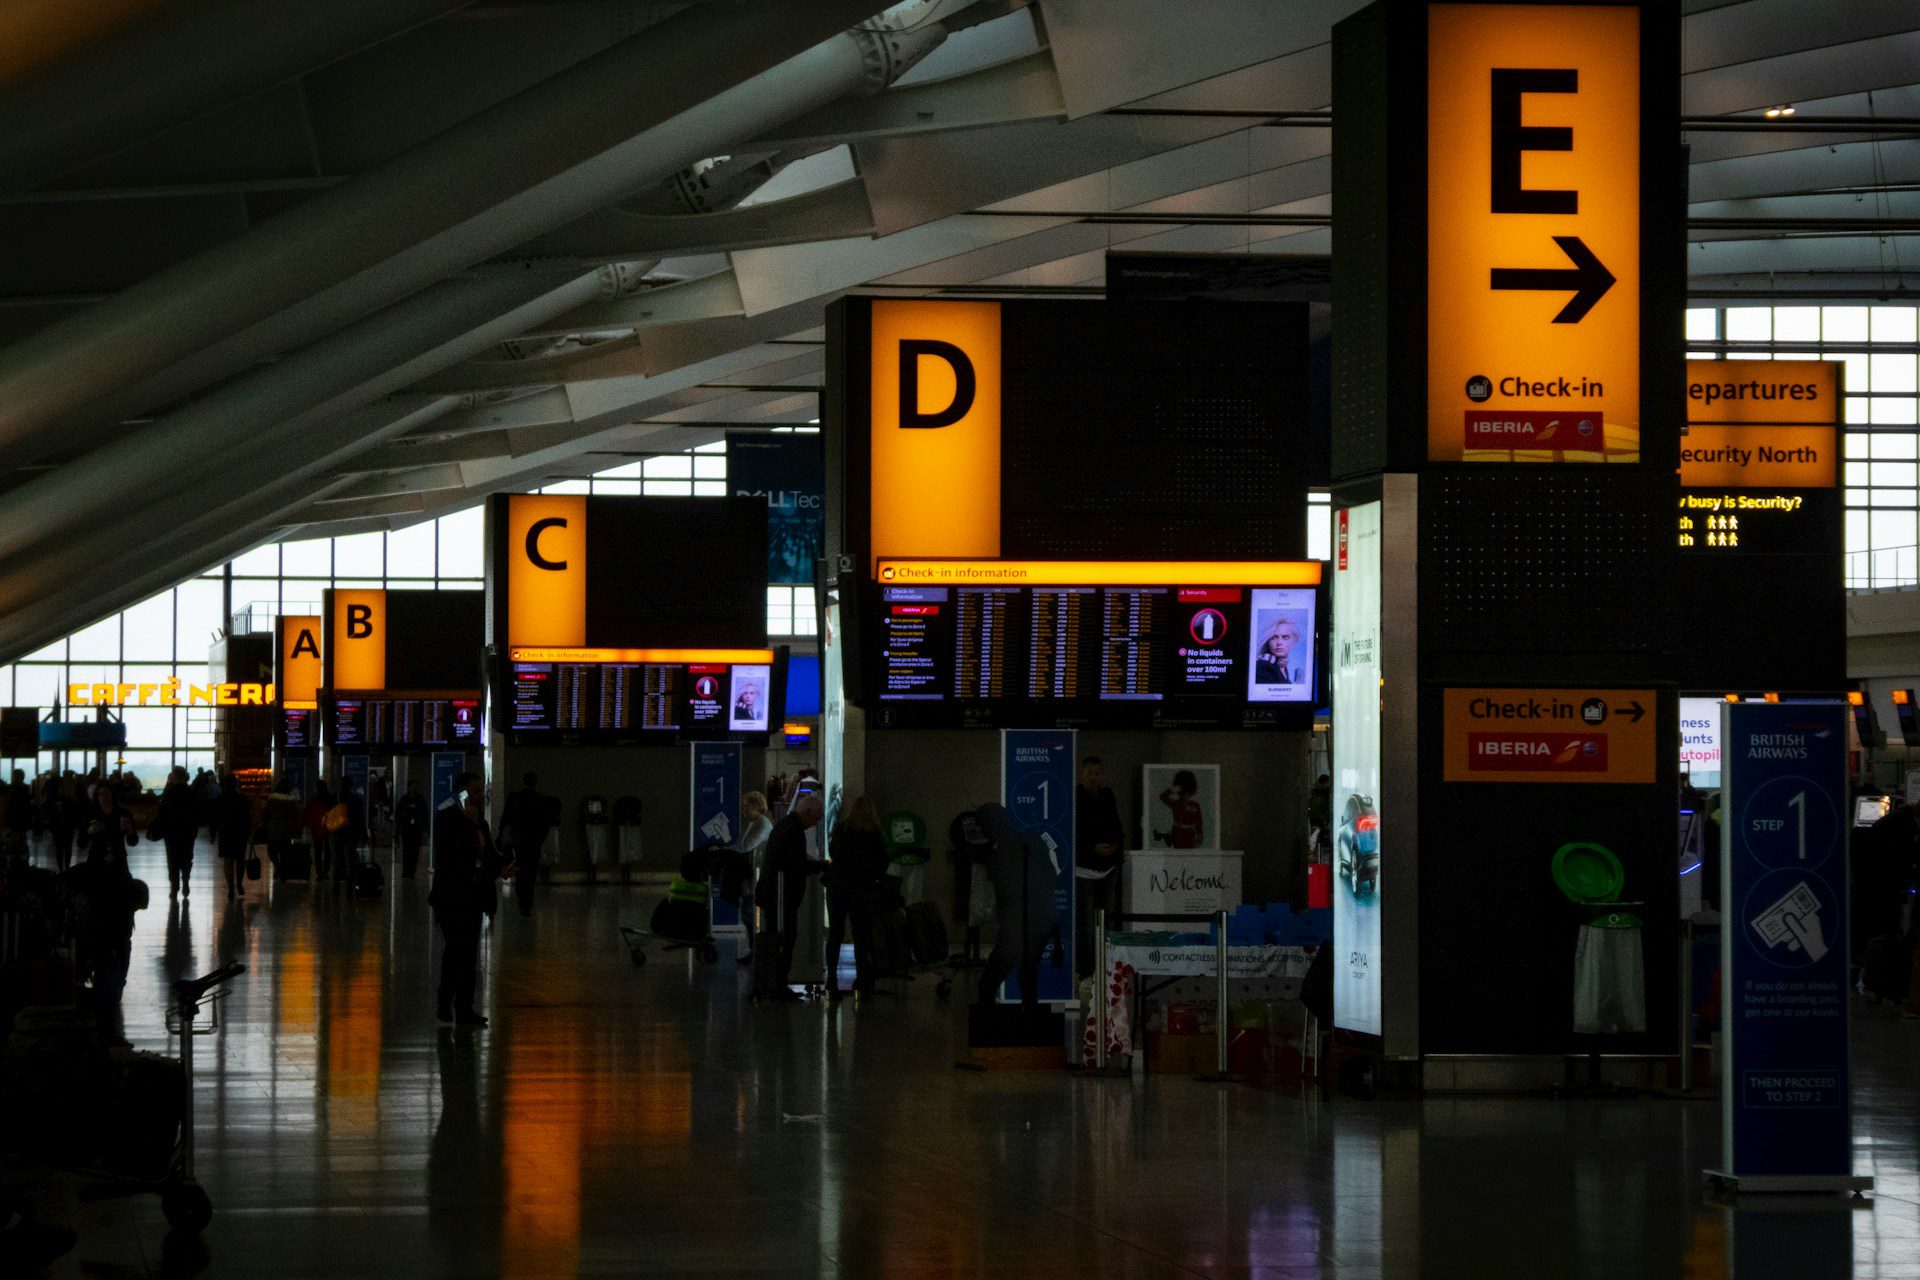 A photo of the check in desks inside Heathrow Airport terminal, showing orange glowing signs with letters on.